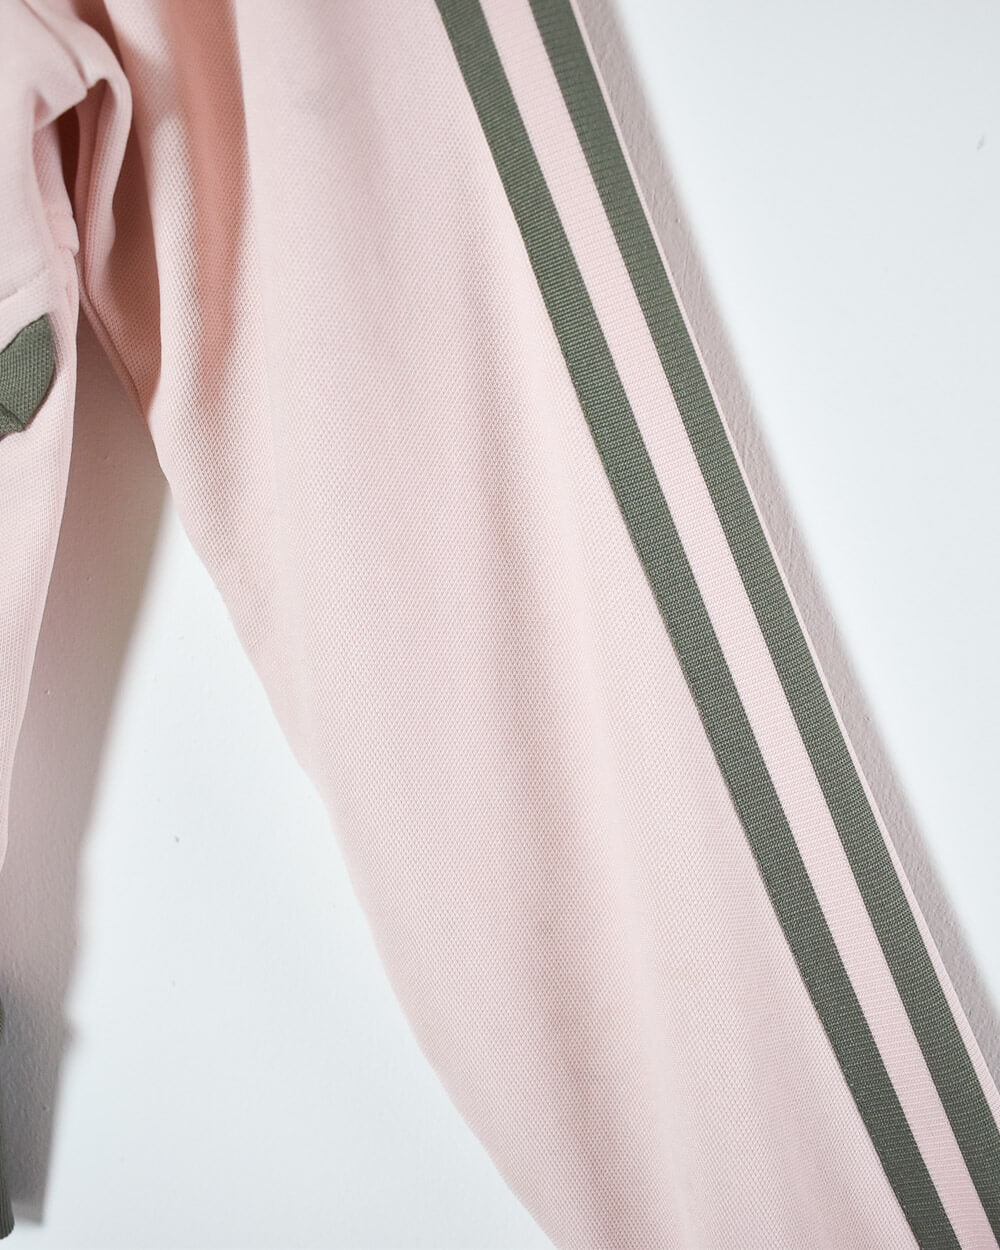 Vintage Adidas Track Pants - Women's Small